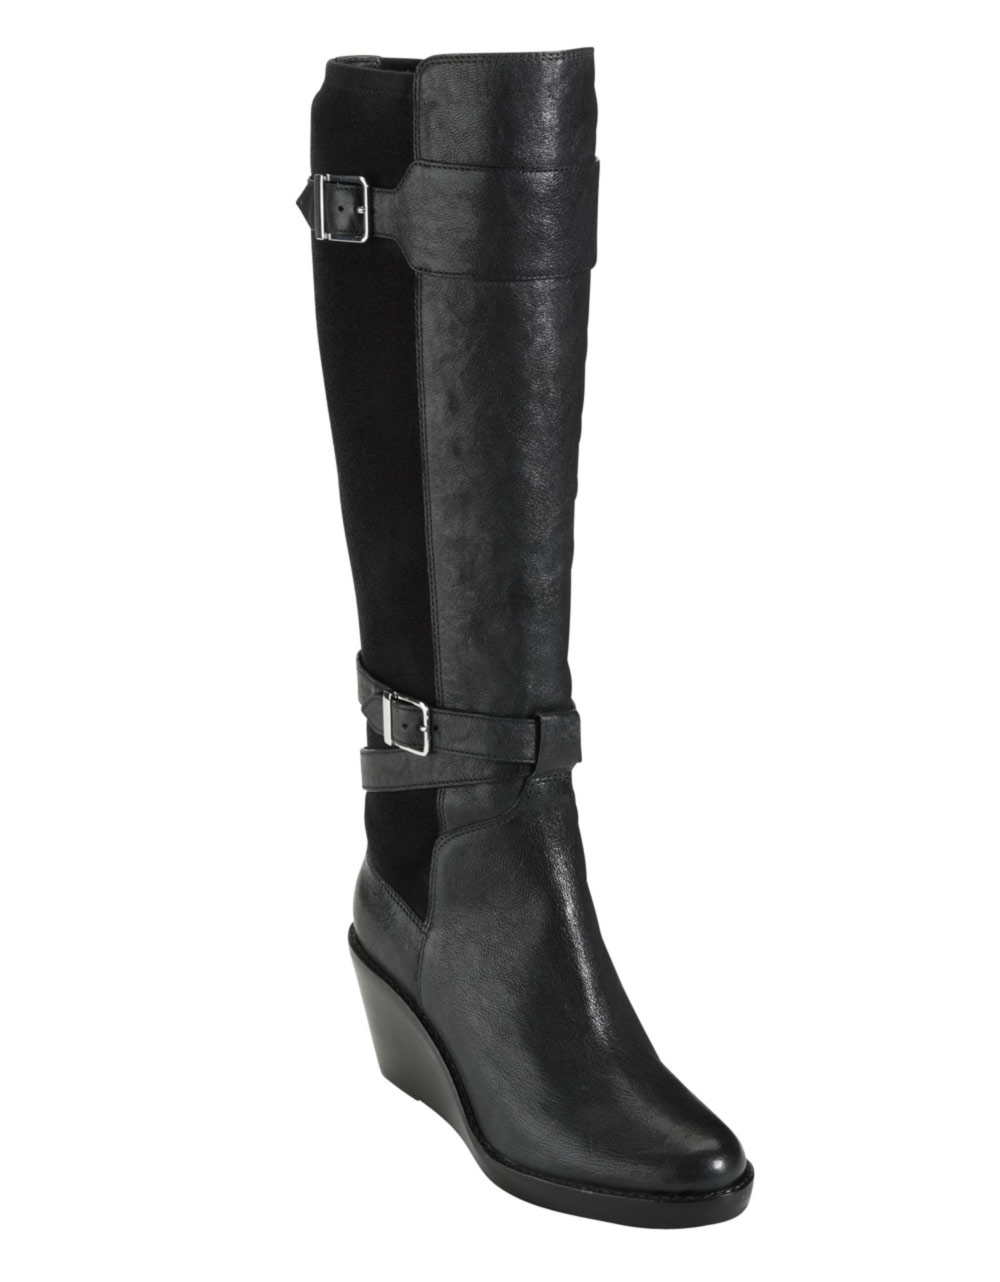 Cole haan Patricia Tall Leather Wedge Boots with Buckle Accents in ...